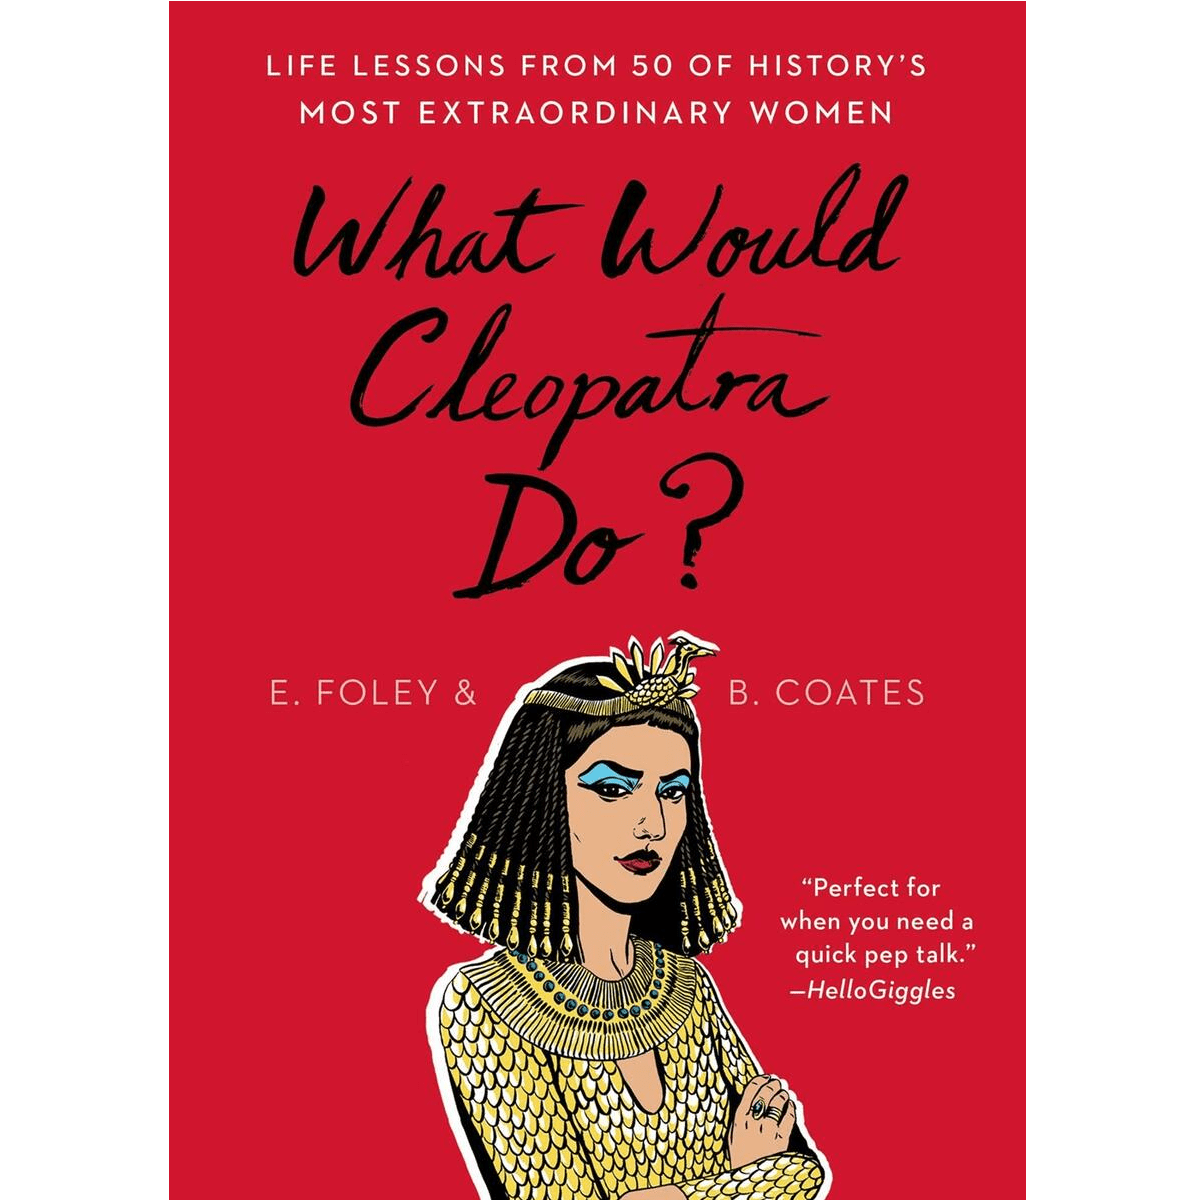 What Would Cleopatra Do? | Life Lessons from 50 of History's Most Extraordinary Women - Spiral Circle